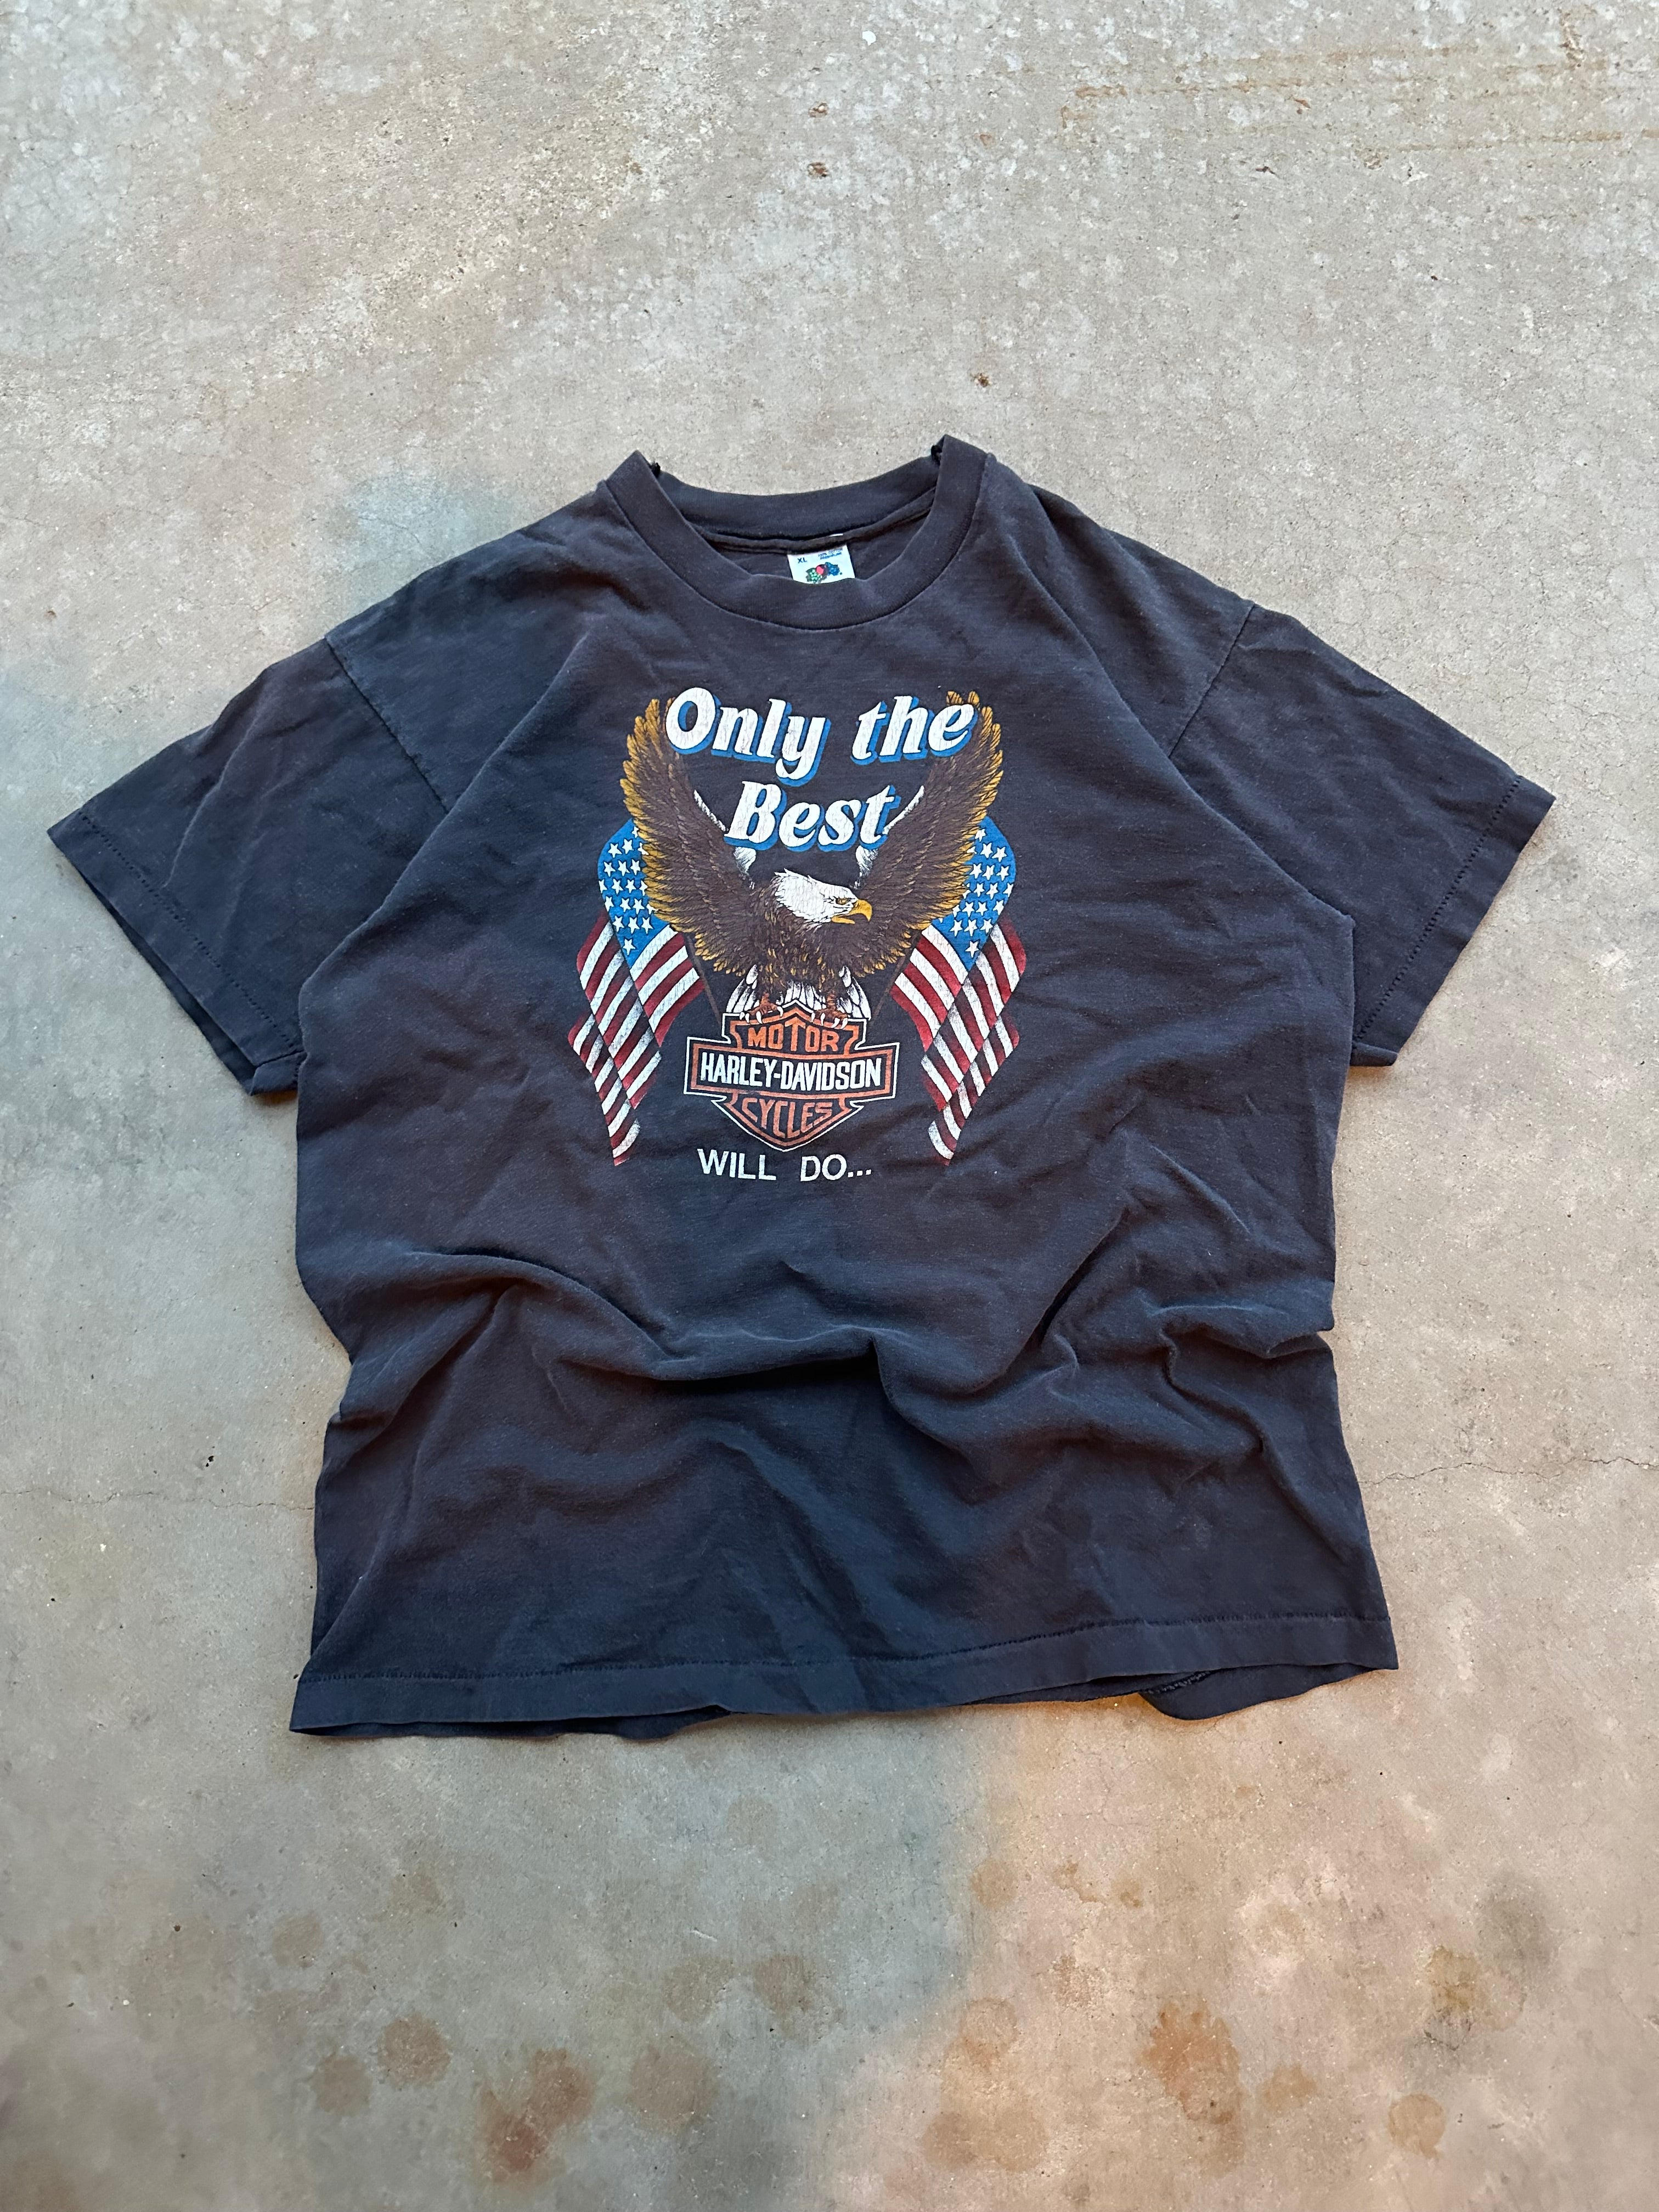 1987 Harley Davidson “Only the Best” T-Shirt (XL)